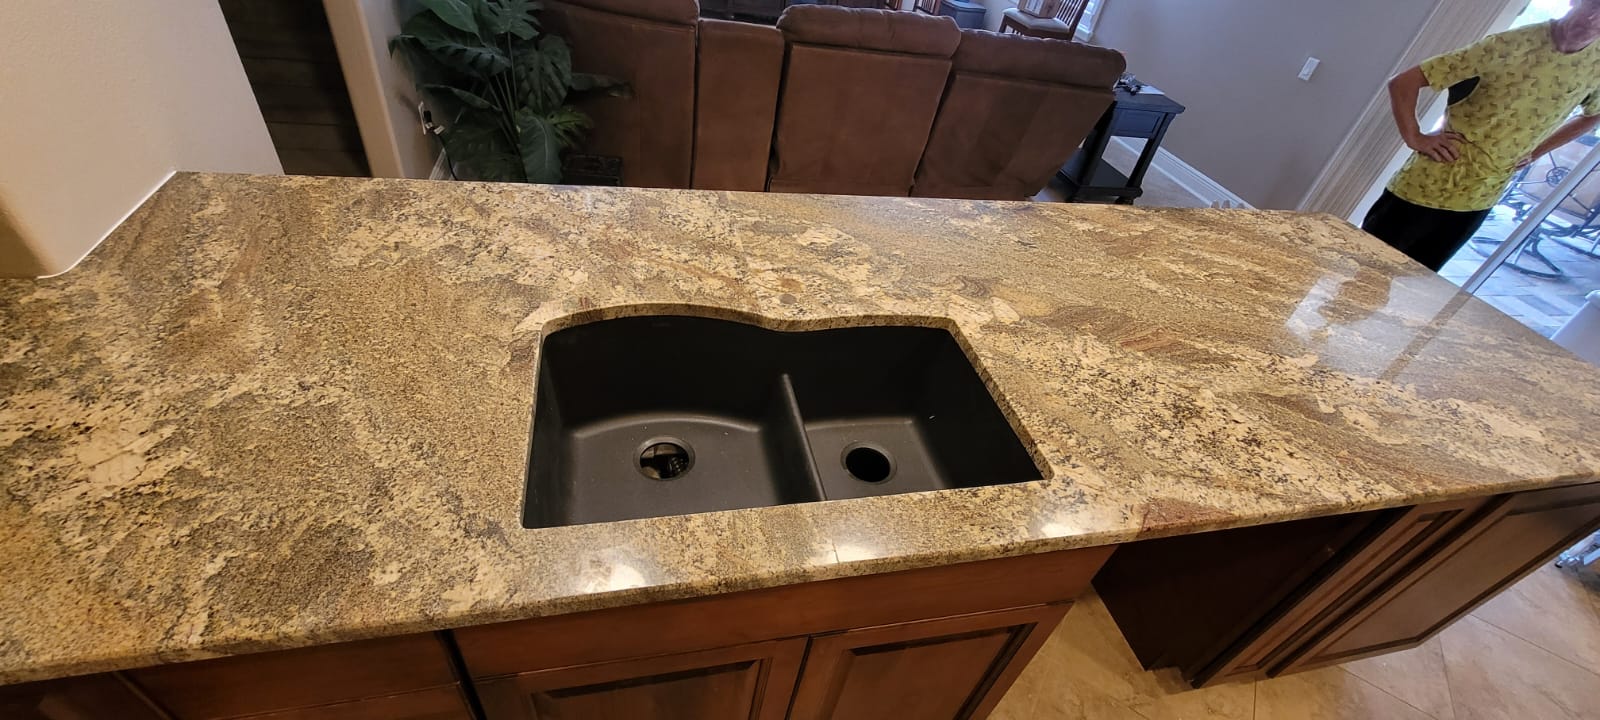 A kitchen counter with two sinks and a wooden cabinet.